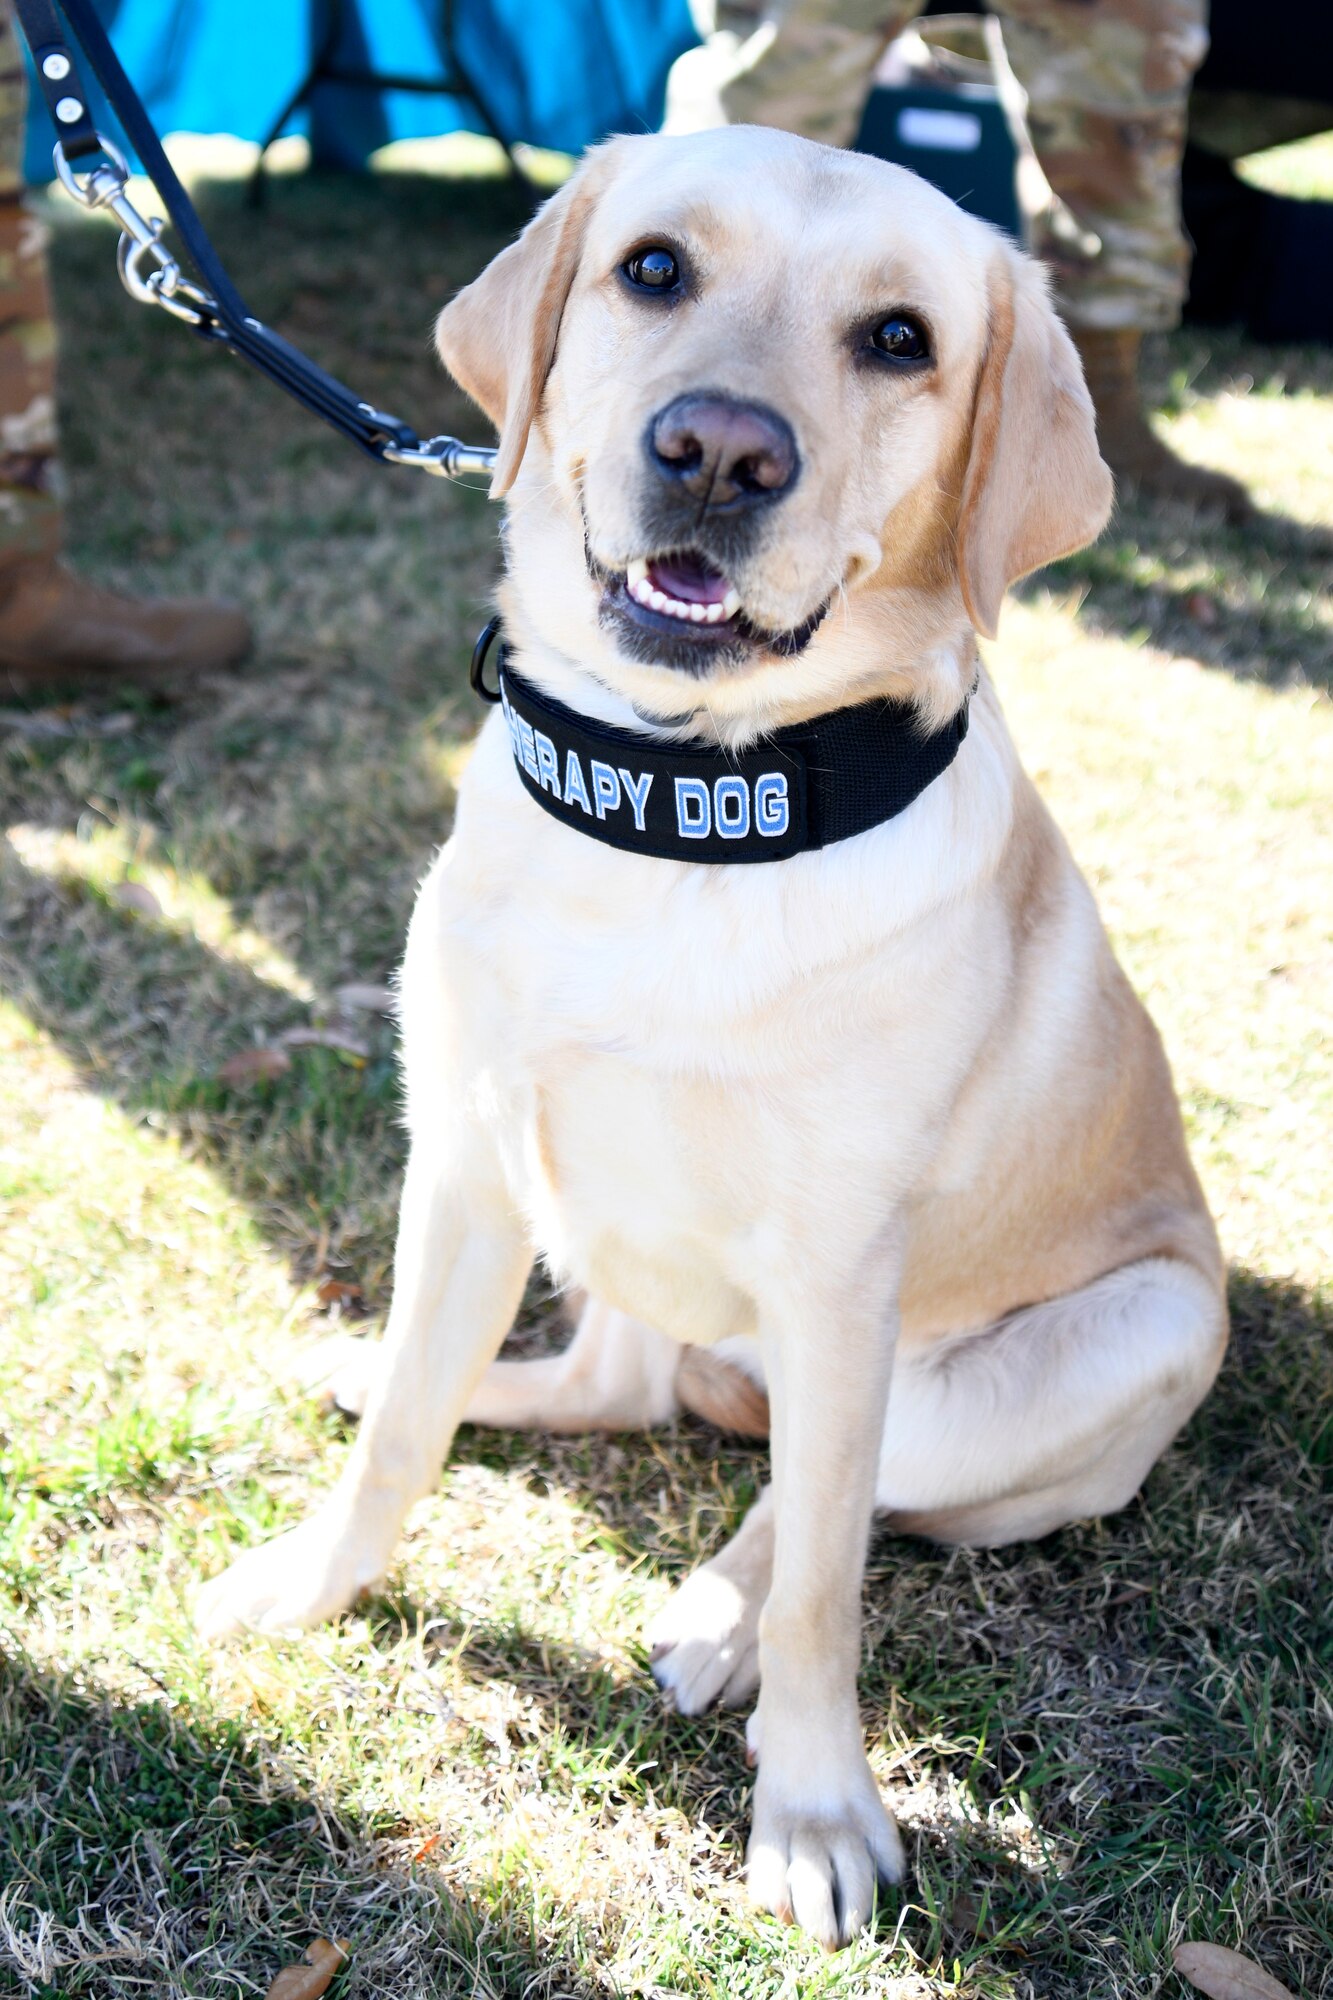 Dallas, 301 st Fighter Wing therapy dog, rests during the Sexual Assault

Prevention and Response meet and greet at Naval Air Station Joint Reserve Base Fort Worth, Texas, April 2, 2022. The 301 FW Helping Agencies team acquired Dallas to promote stress relief.